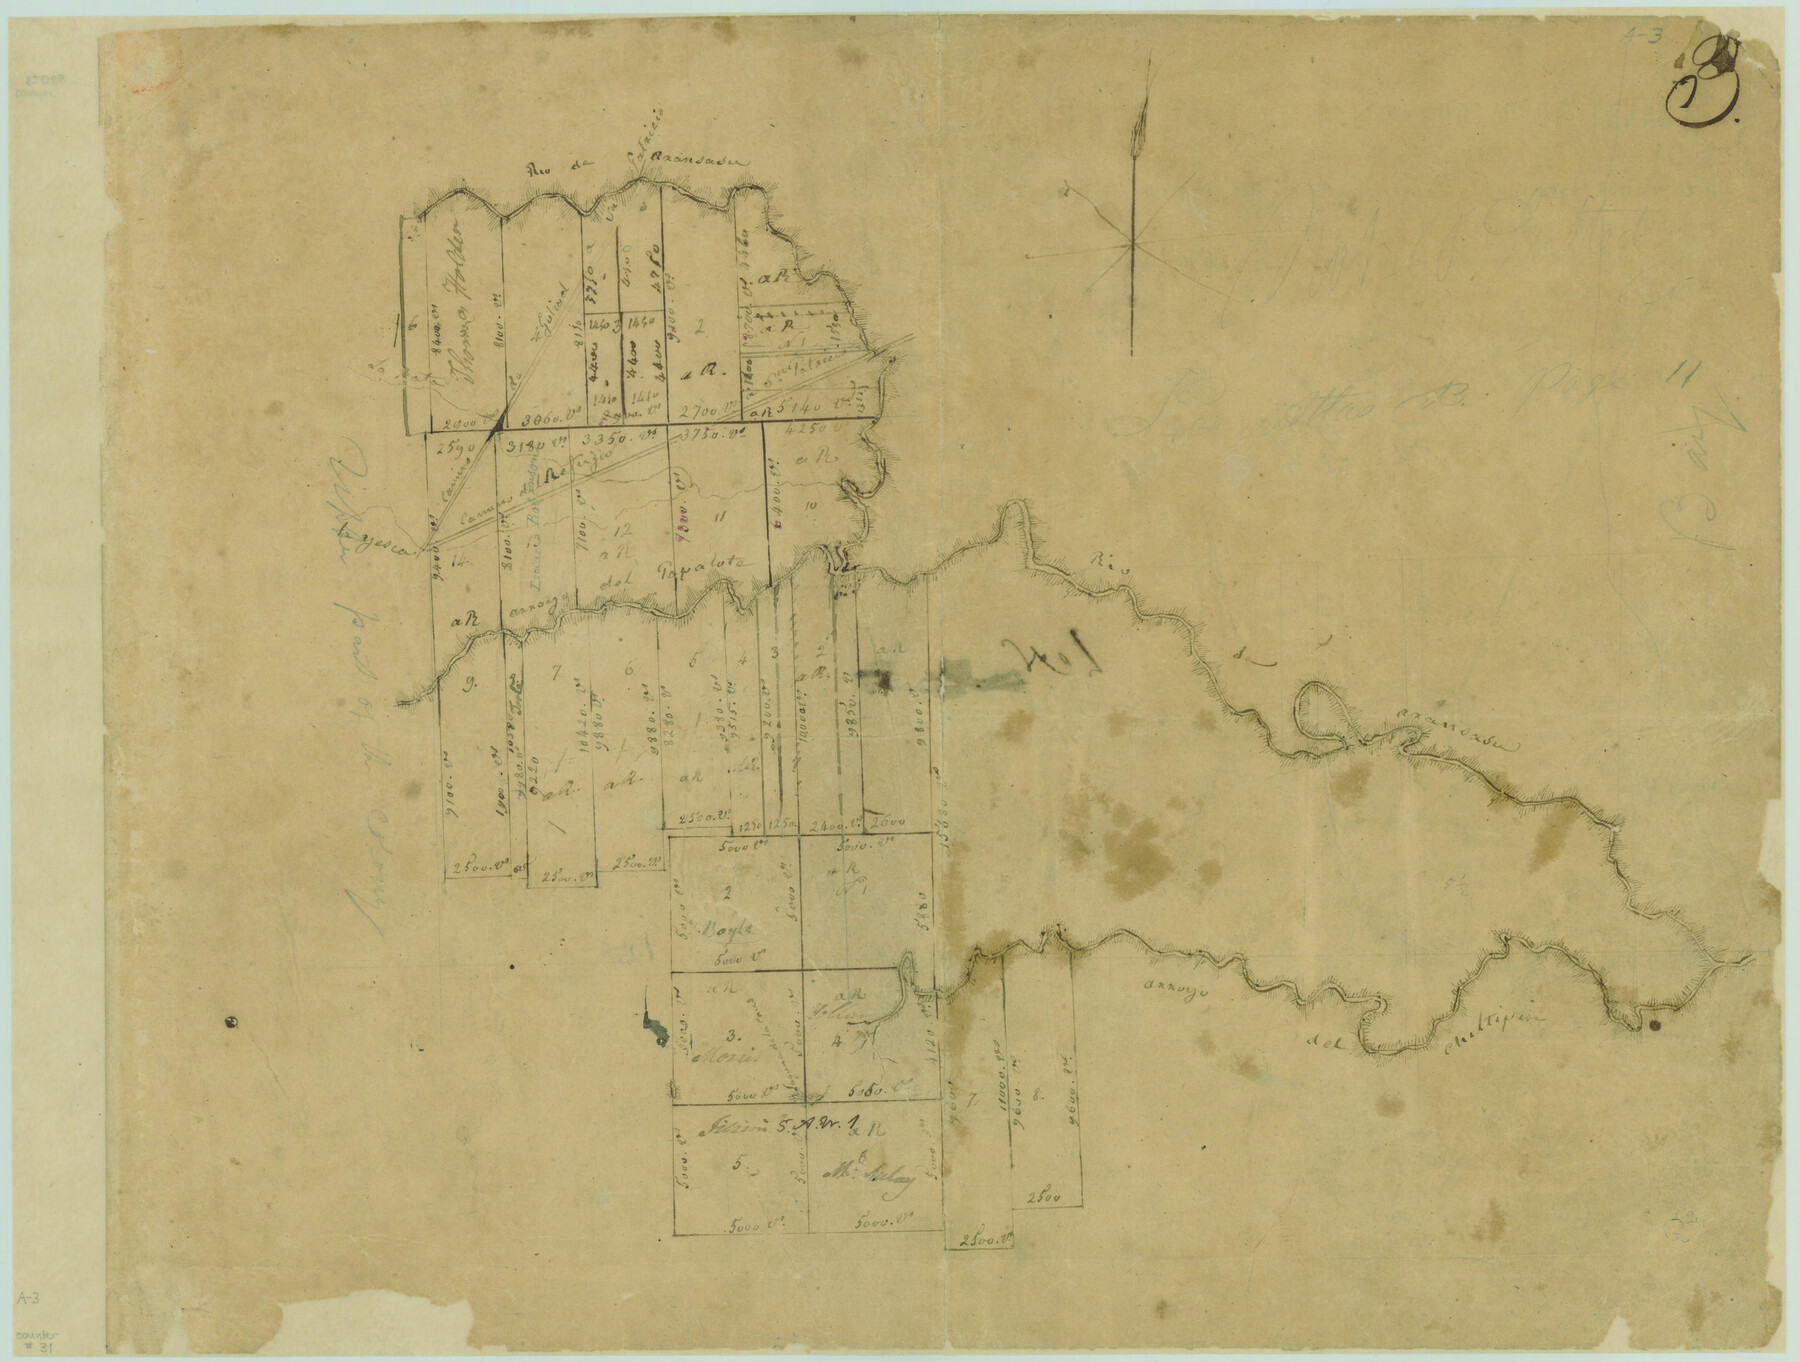 31, [Surveys in Power and Hewetson's Colony along the Aransas River, shown as Aransasu and Chiltipin Creek], General Map Collection